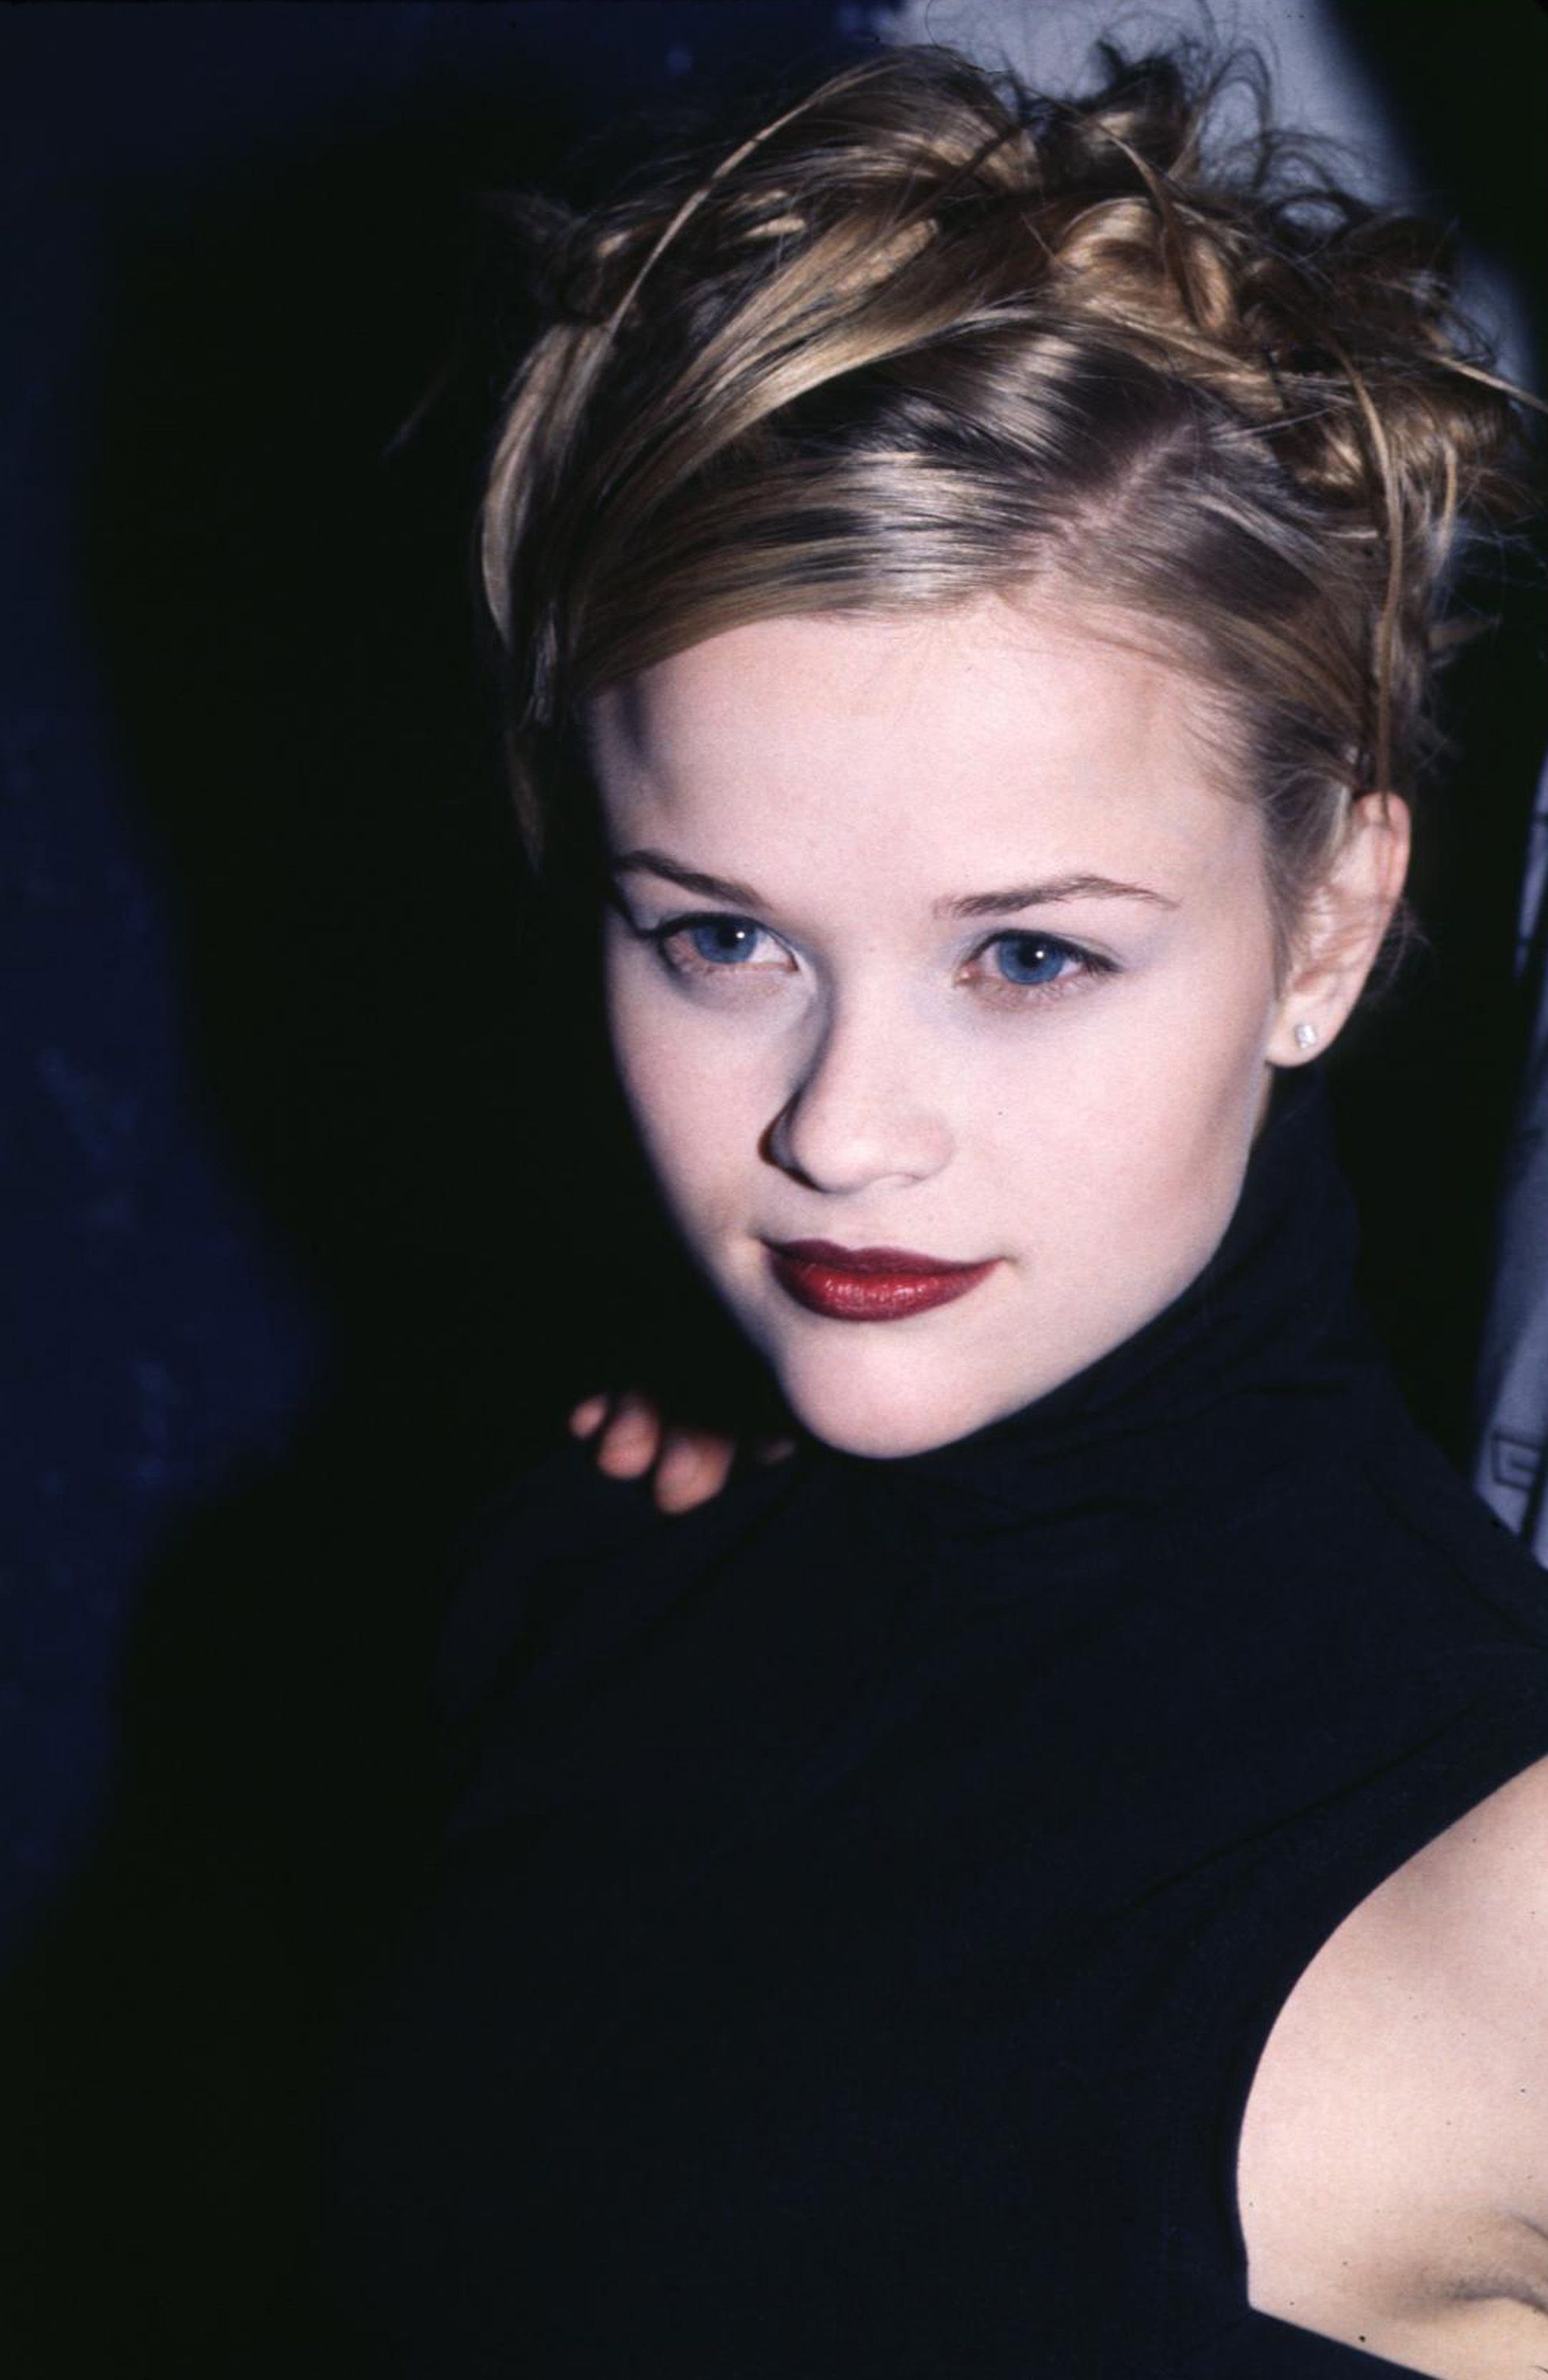 værdig Accord bule 12 Best '90s Makeup Looks - Best Makeup Trends From the 1990s